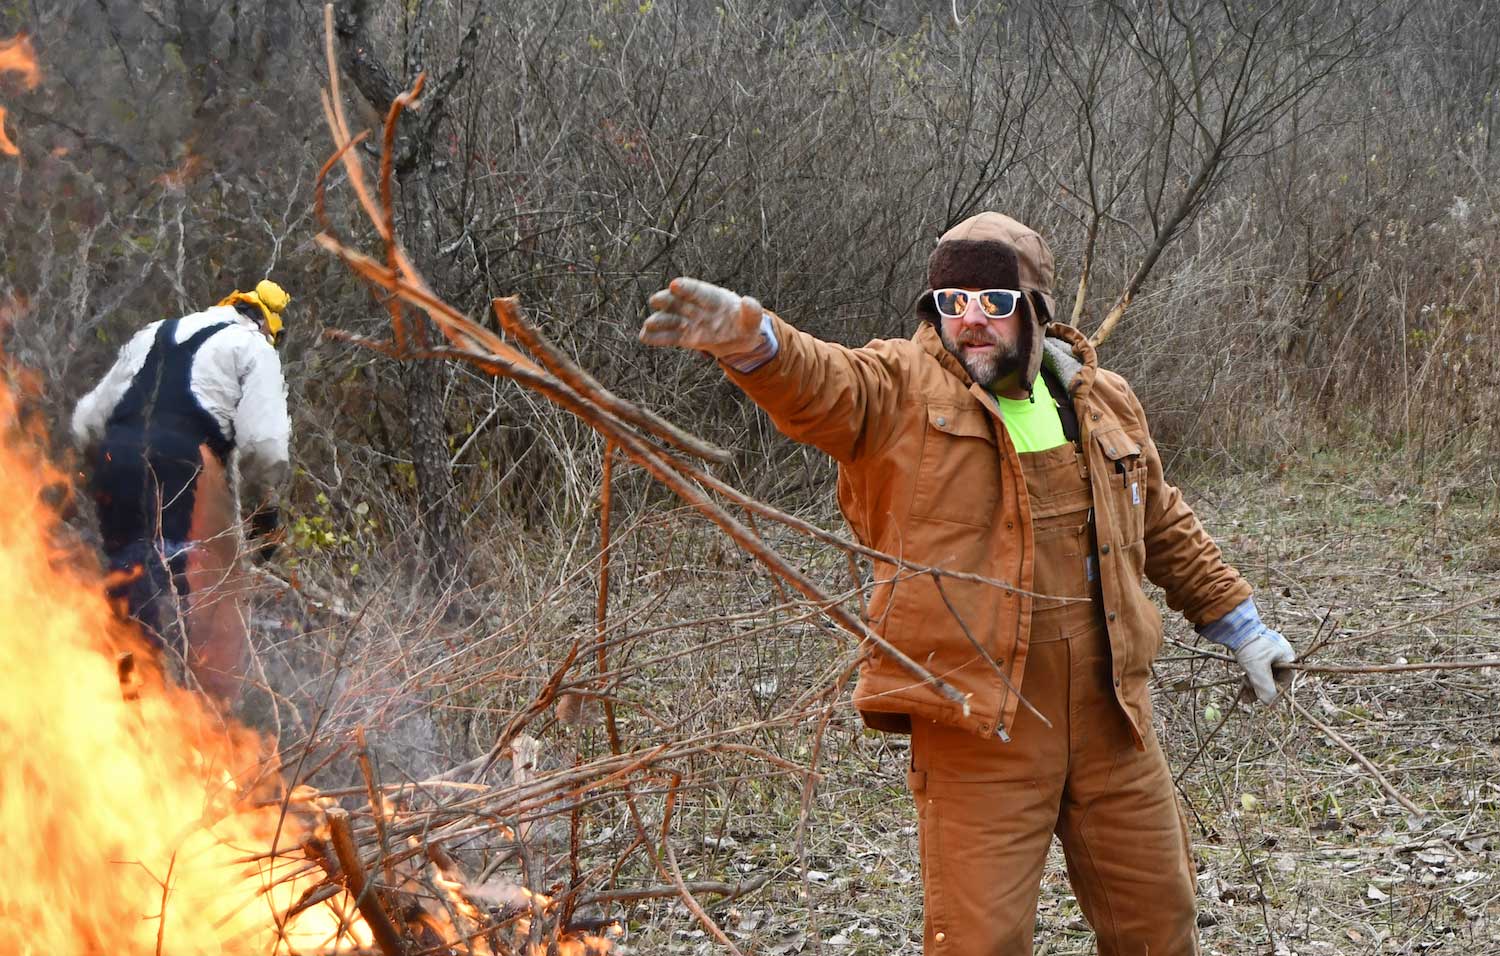 A person throwing a large branch on a burning brush pile.